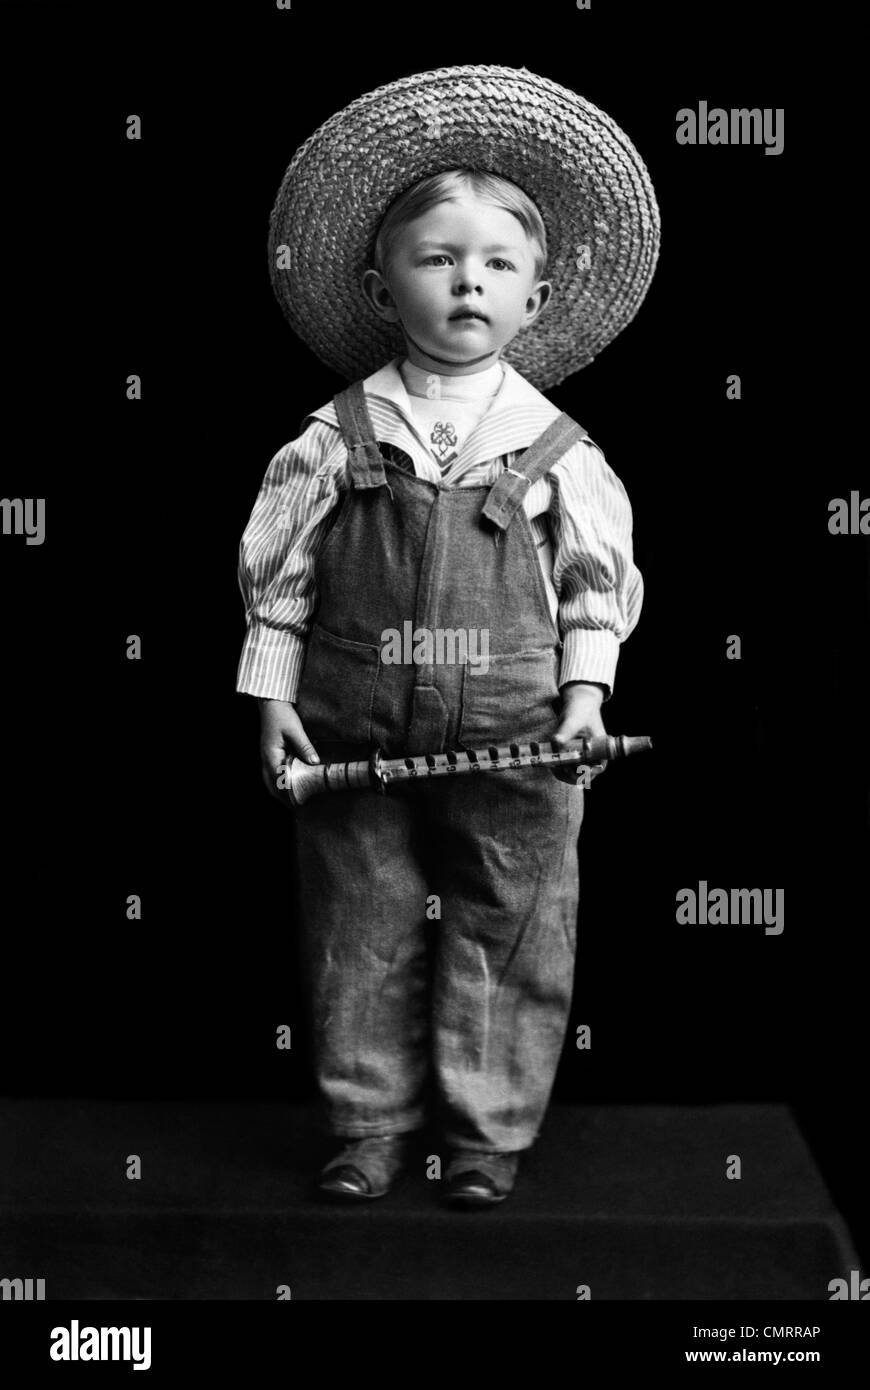 1800s 1890s TURN OF THE CENTURY BOY IN OVERALLS & STRAW HAT HOLDING SMALL CLARINET-LIKE INSTRUMENT Stock Photo